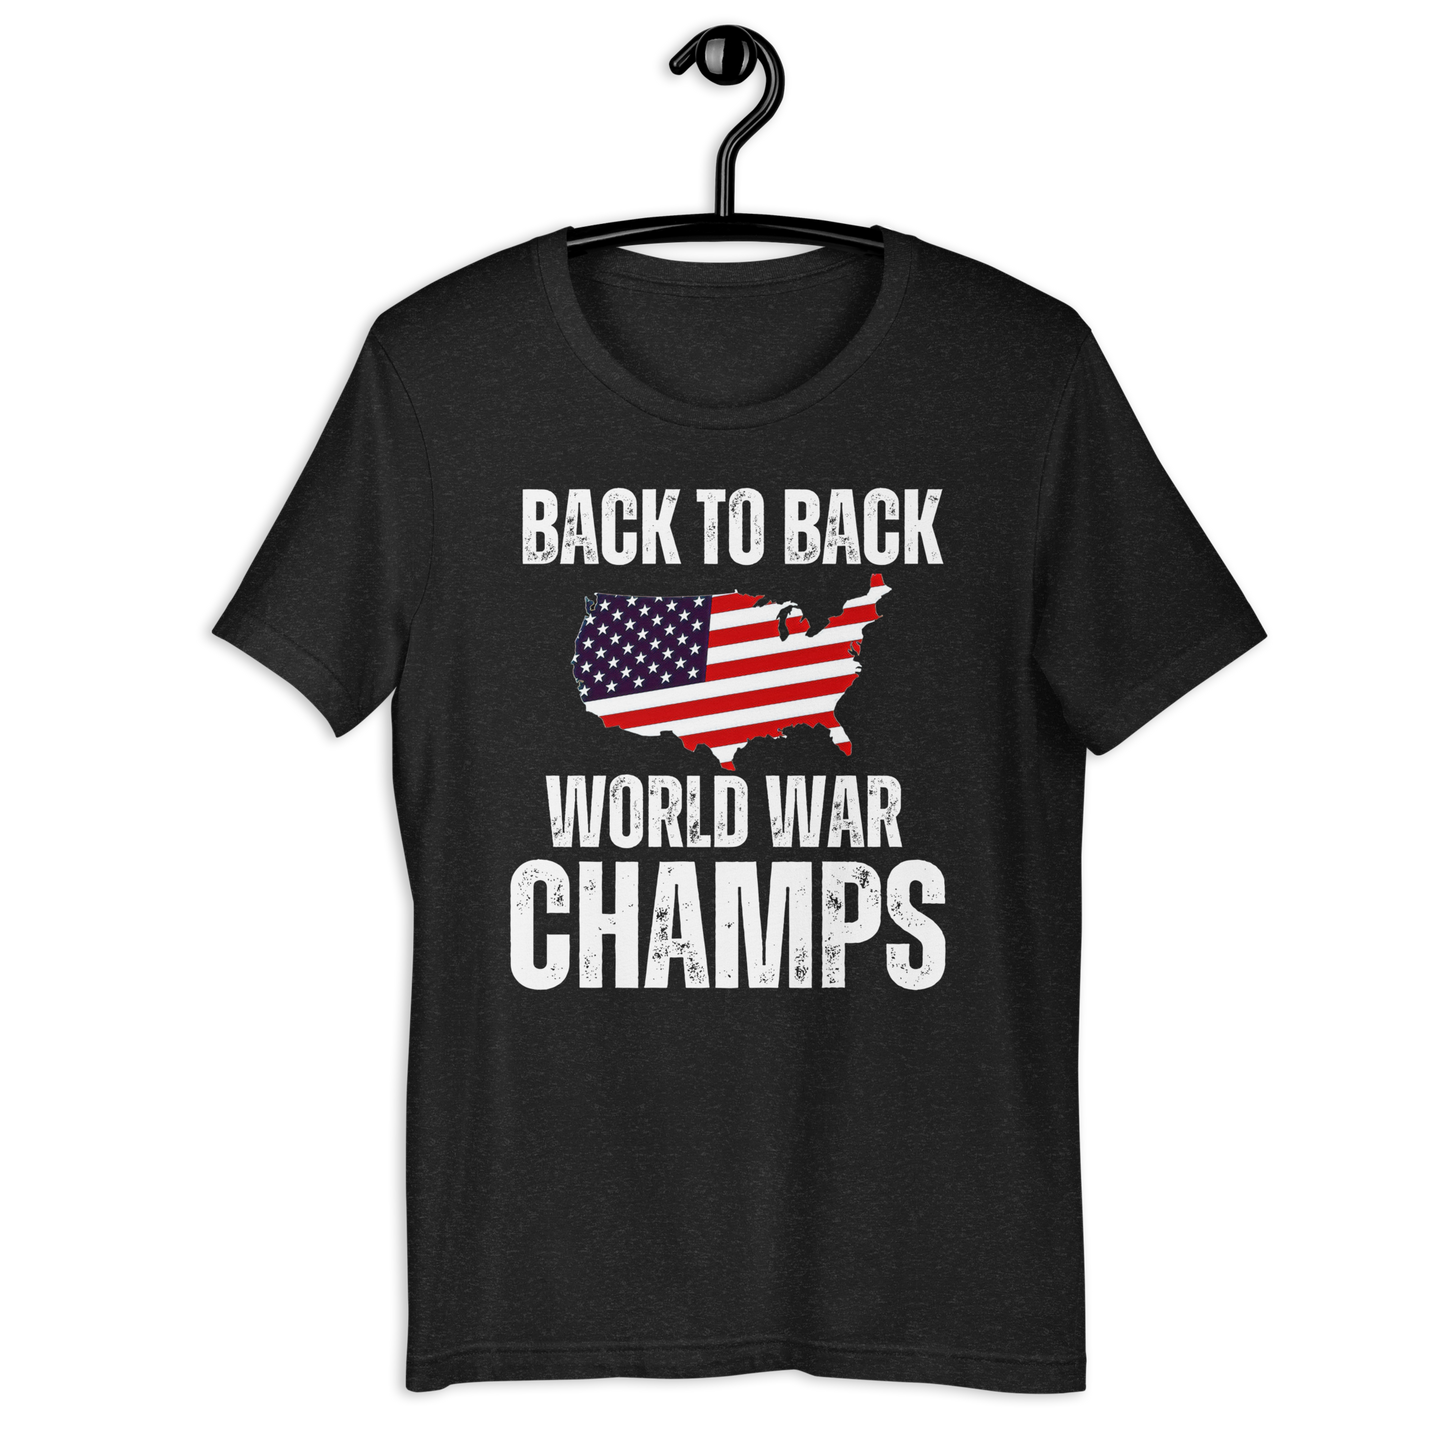 Back to Back WW Champs T-Shirt